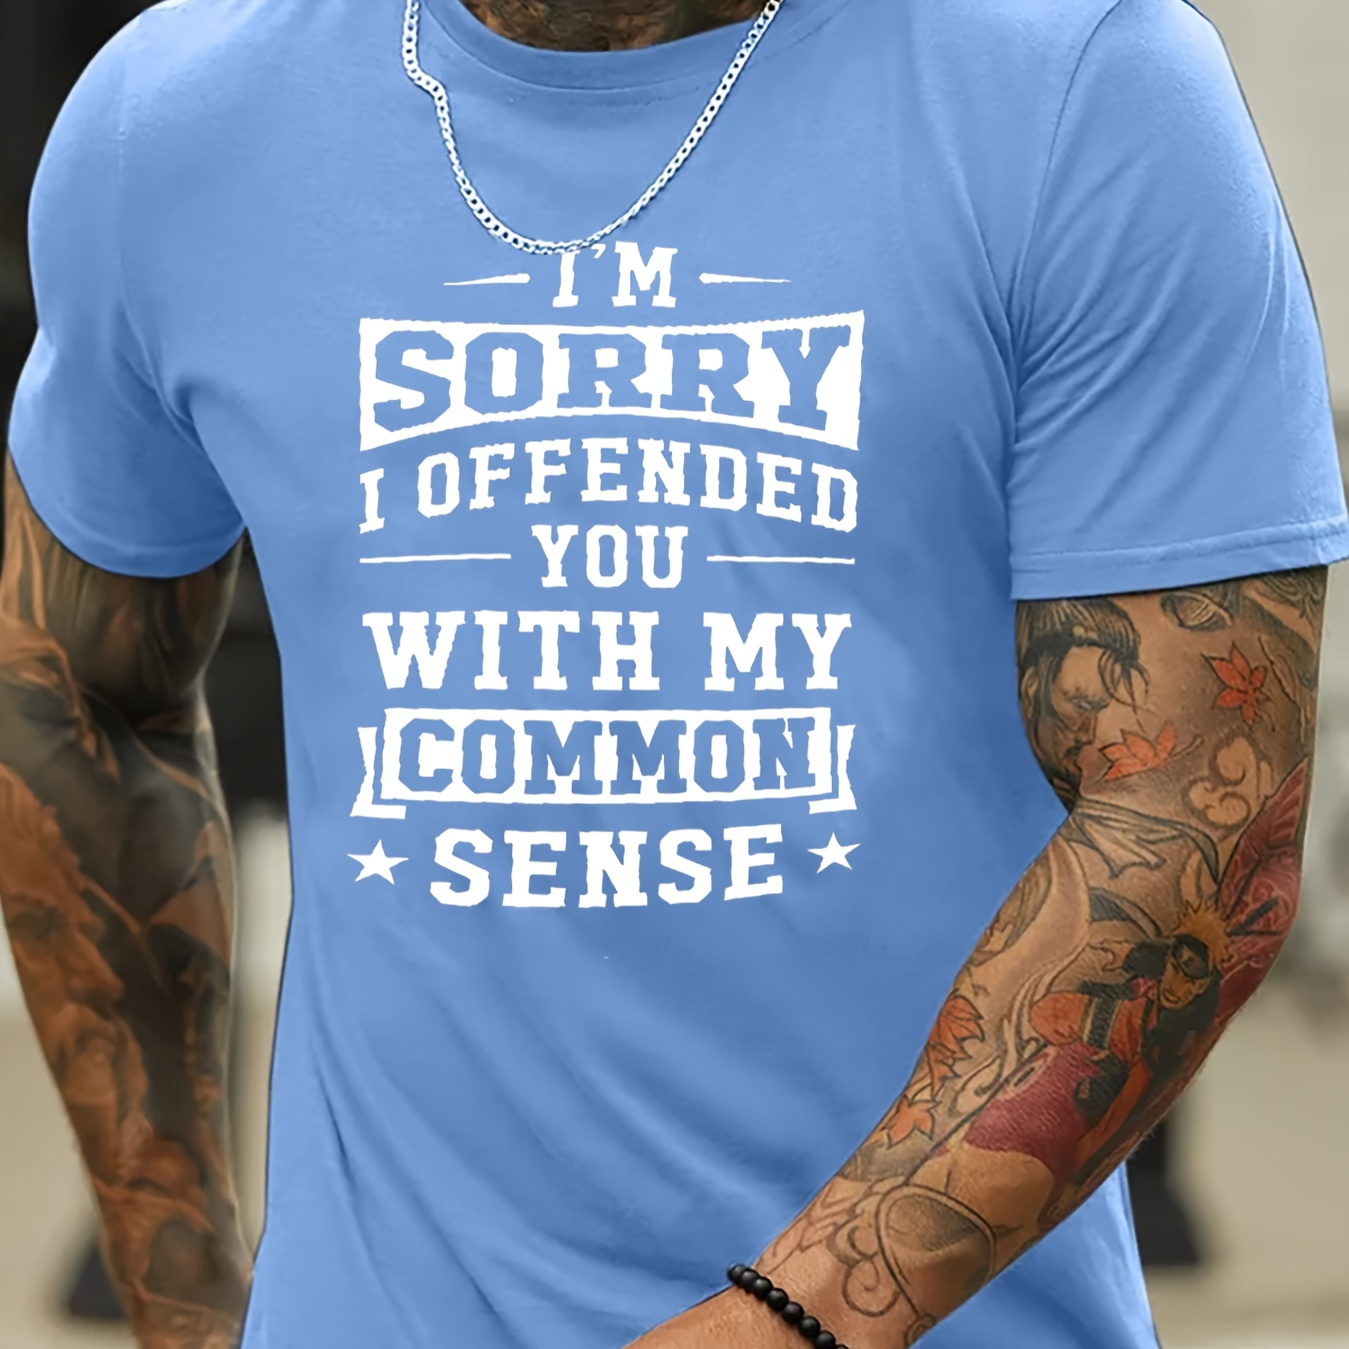 

I Sorry I Offended You Print Men's Crew Neck T-shirt, Short Sleeve Versatile Casual Summer Clothes